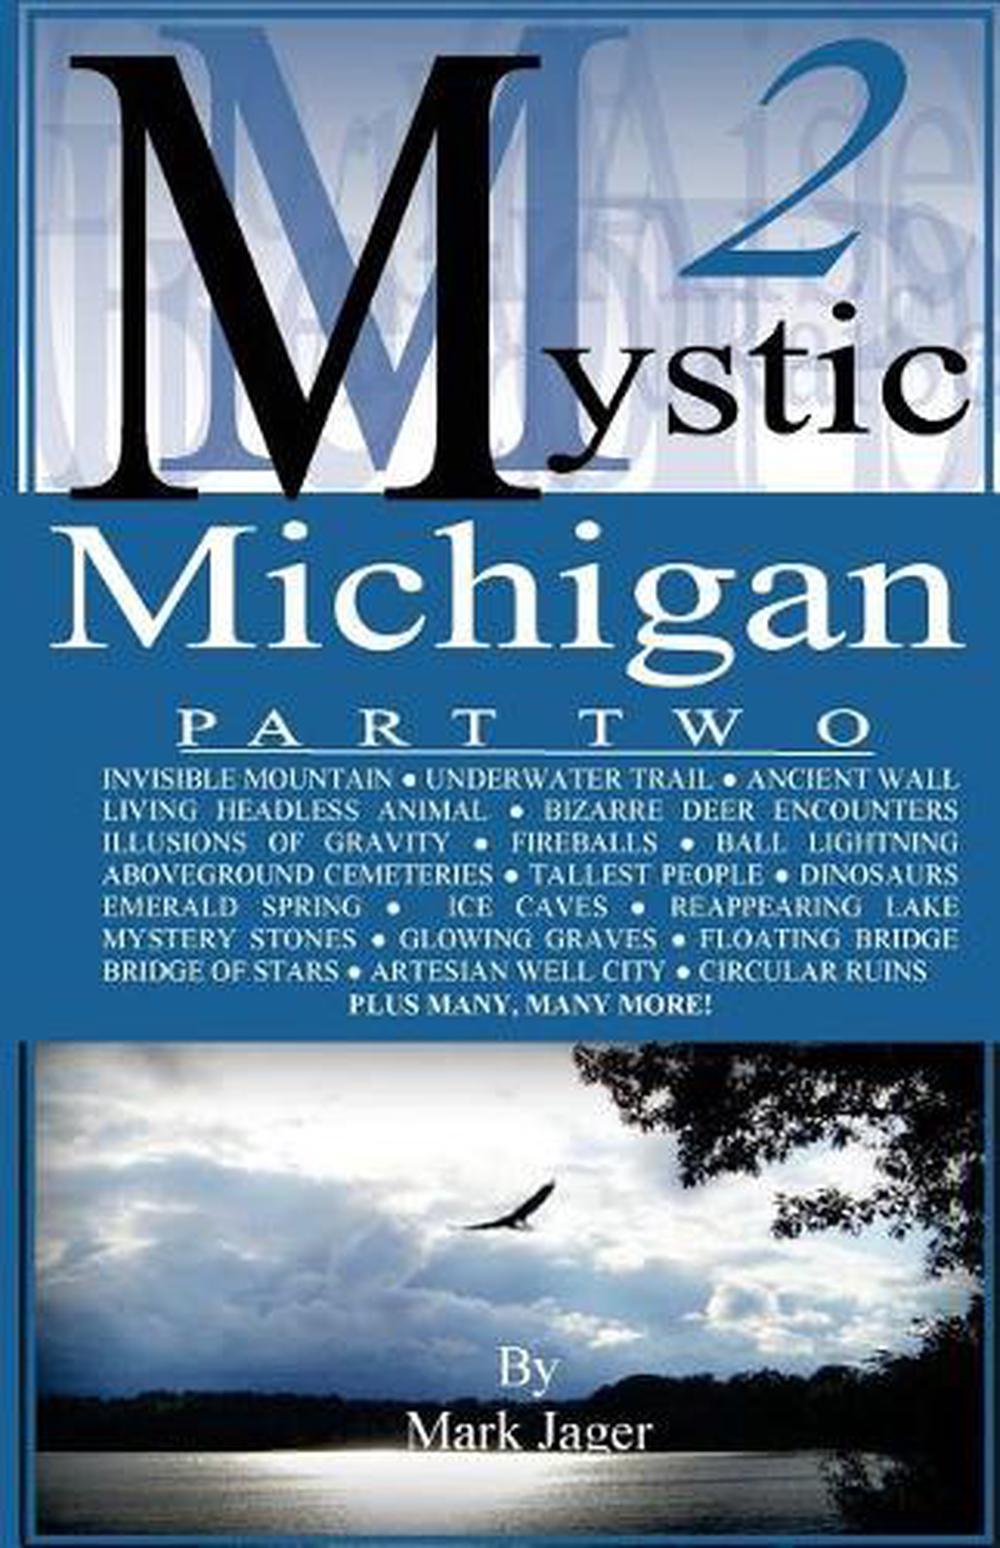 Mystic Michigan Part 2 by Mark Jager (English) Paperback Book Free Shipping! - Picture 1 of 1